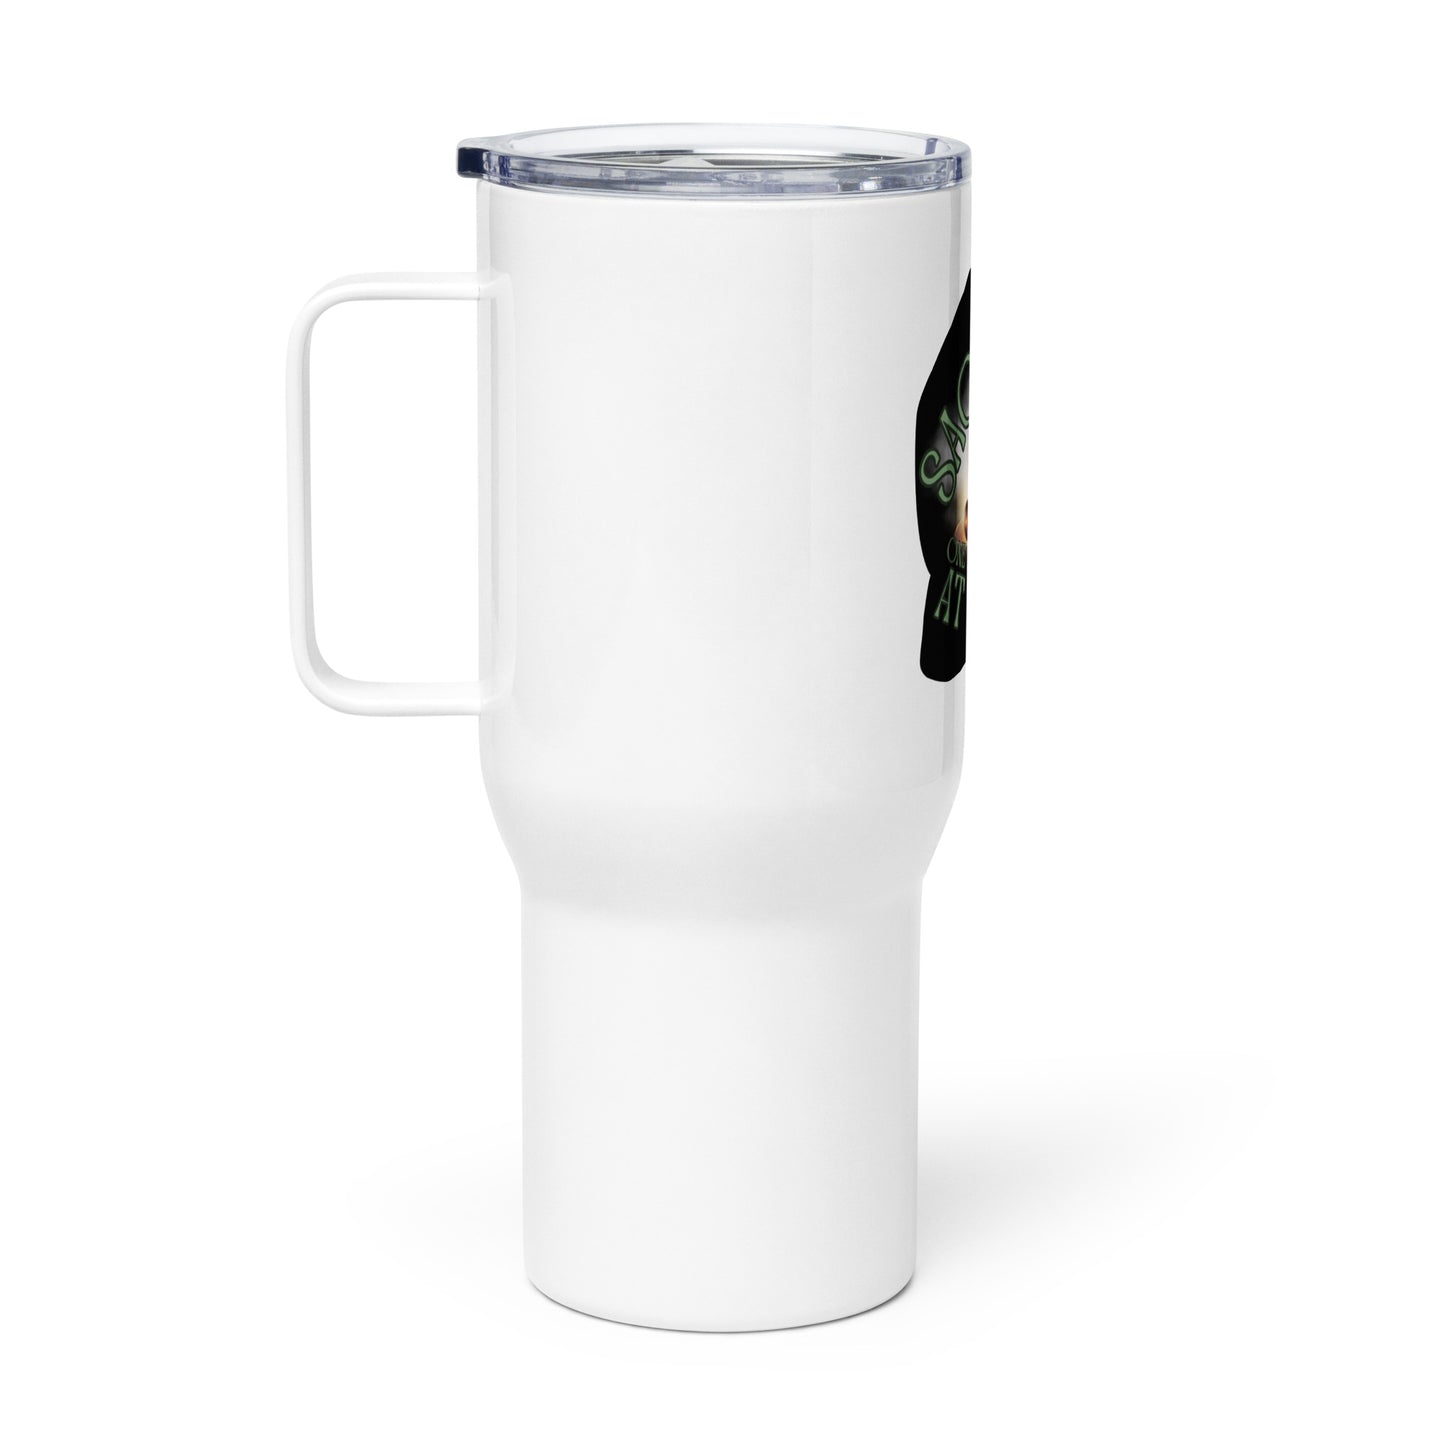 Saging Life One Bad Decision At A Time Travel mug with a handle